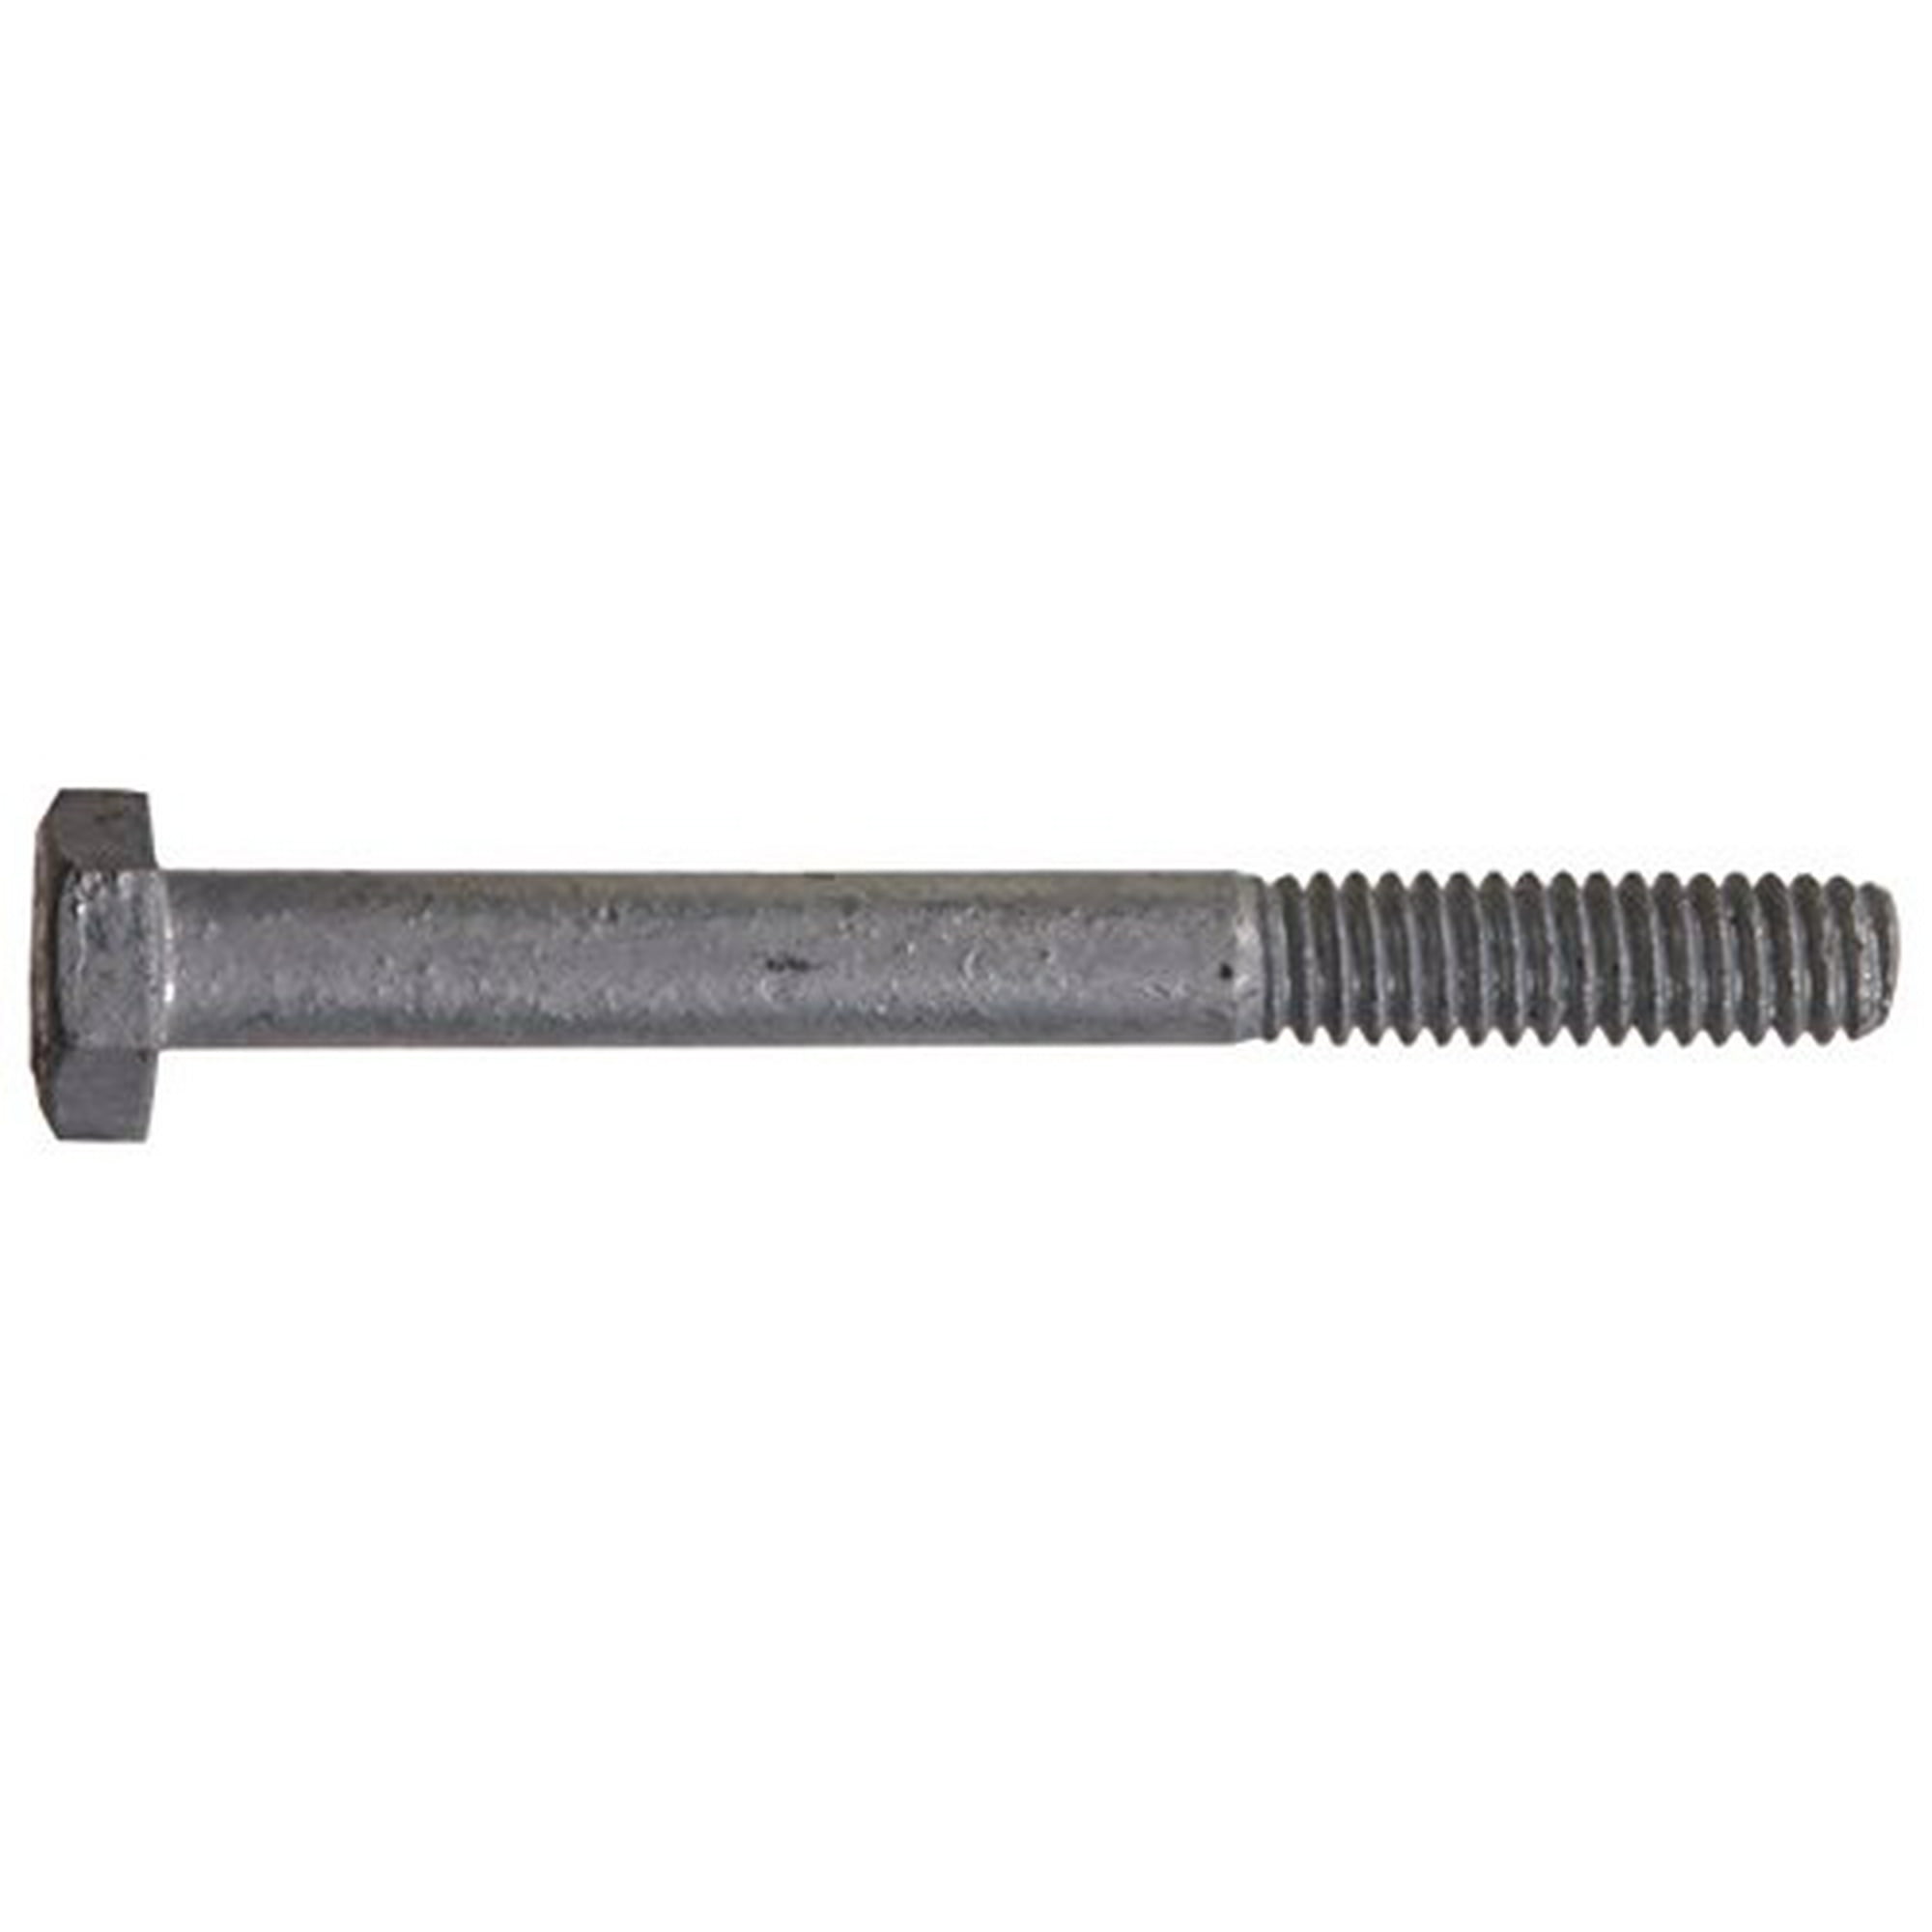 5/8-Inch x 1-Inch The Hillman Group 811650 Hot Dipped Galvanized Hex Bolt 25-Pack 